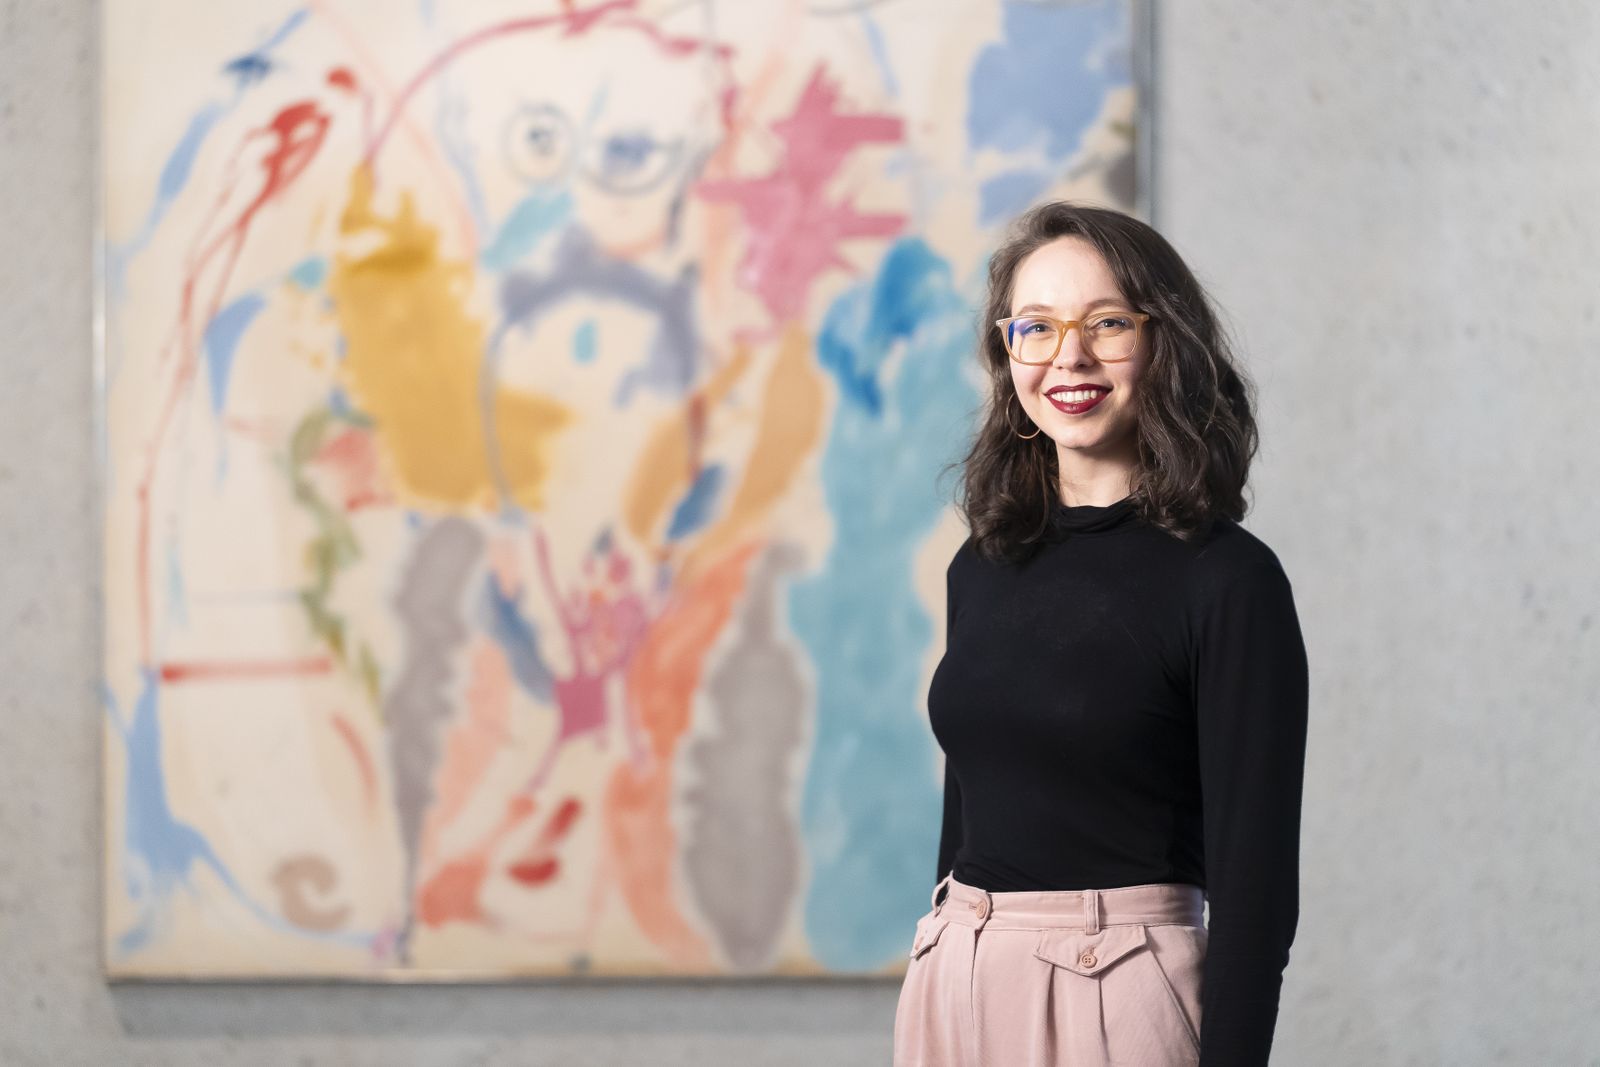 A woman with glasses standing in front of an abstract painting in pastel tones.